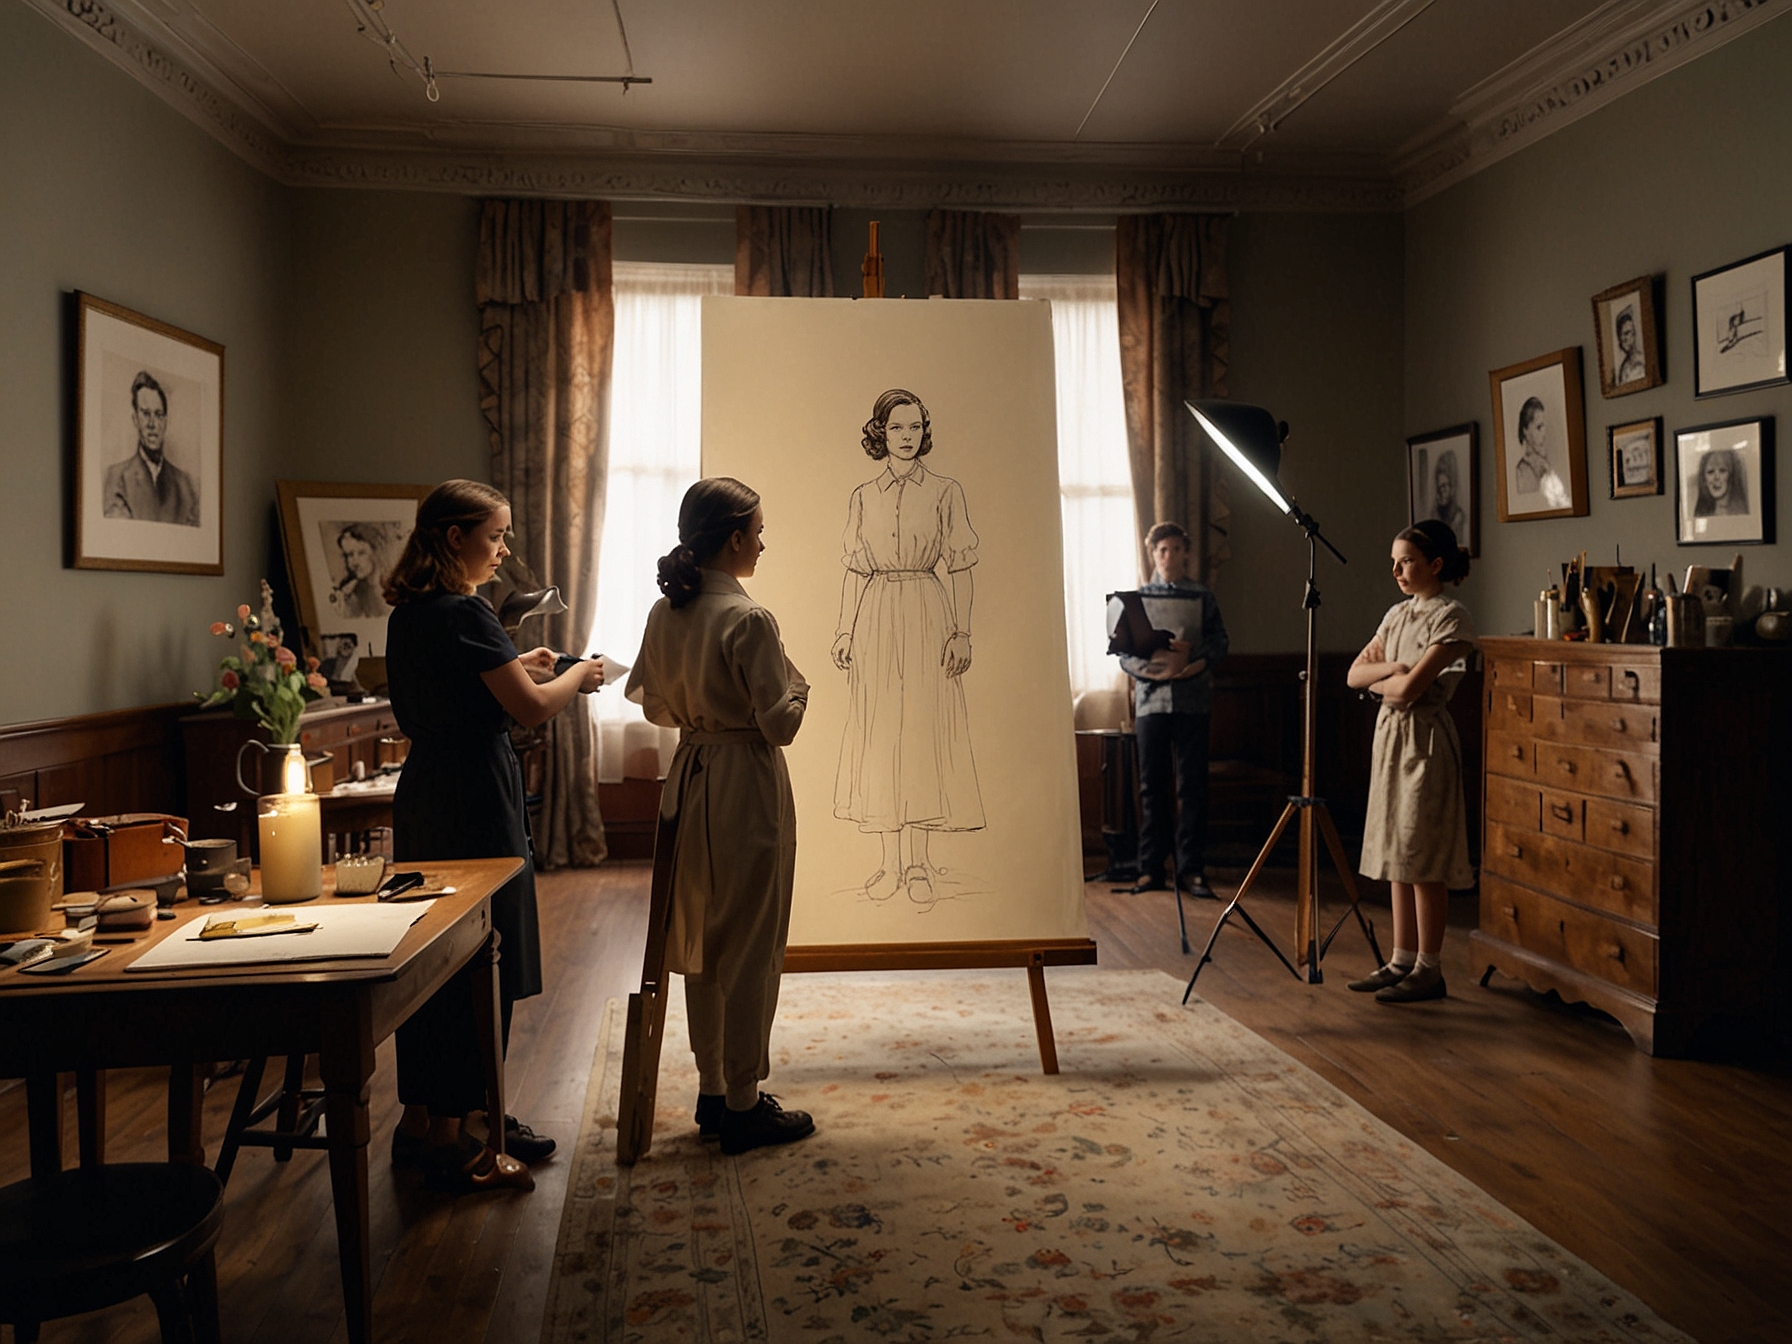 Behind-the-scenes photo of Millie Bobby Brown during the wax figure creation process, surrounded by artists taking measurements and photographs to ensure an accurate portrayal of Enola Holmes.